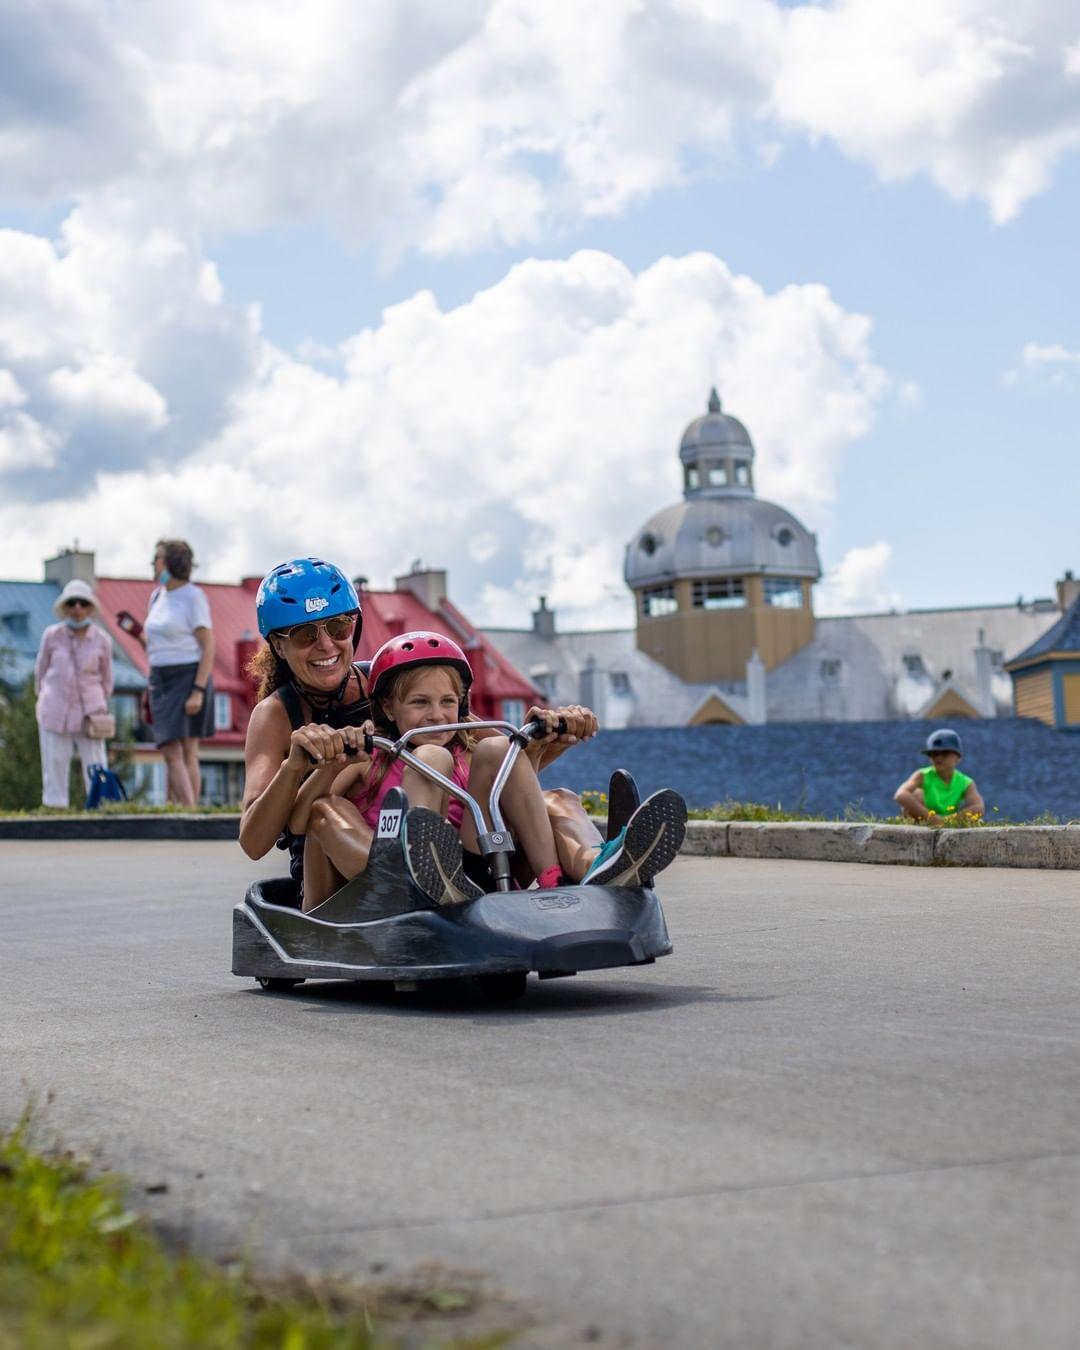 A mother rides down the Luge with her daughter in the same cart.